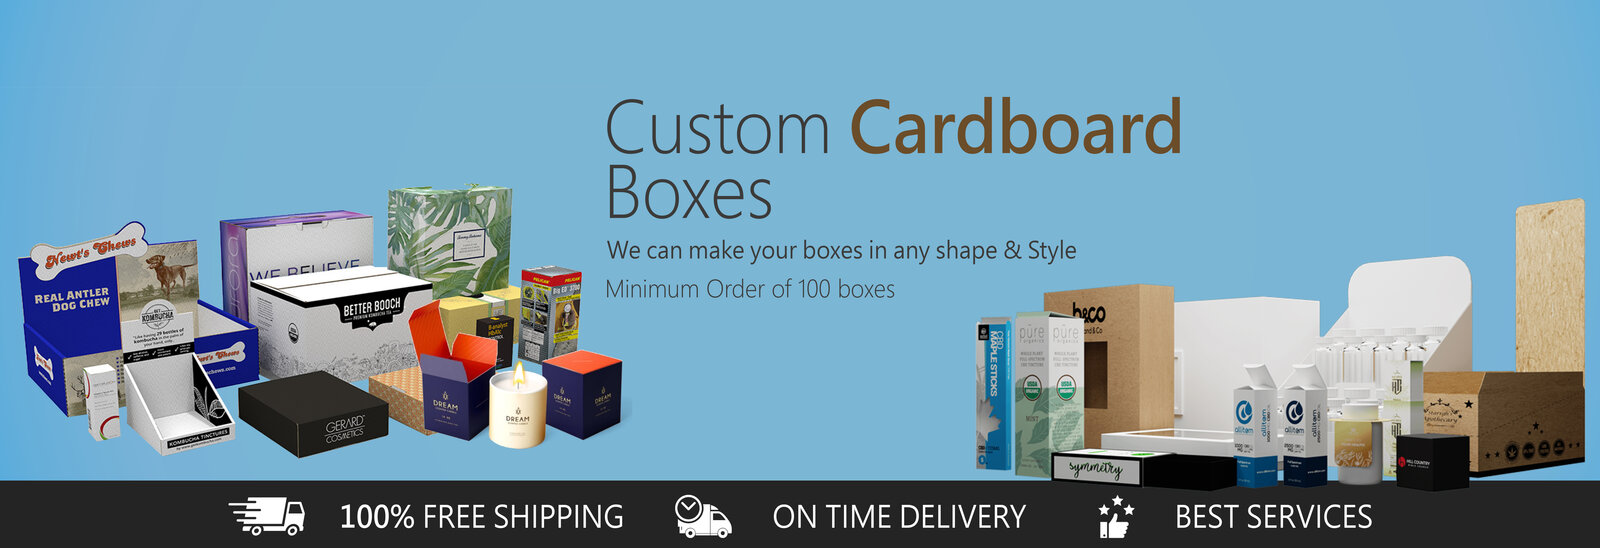 personalized boxes by procustombox.com